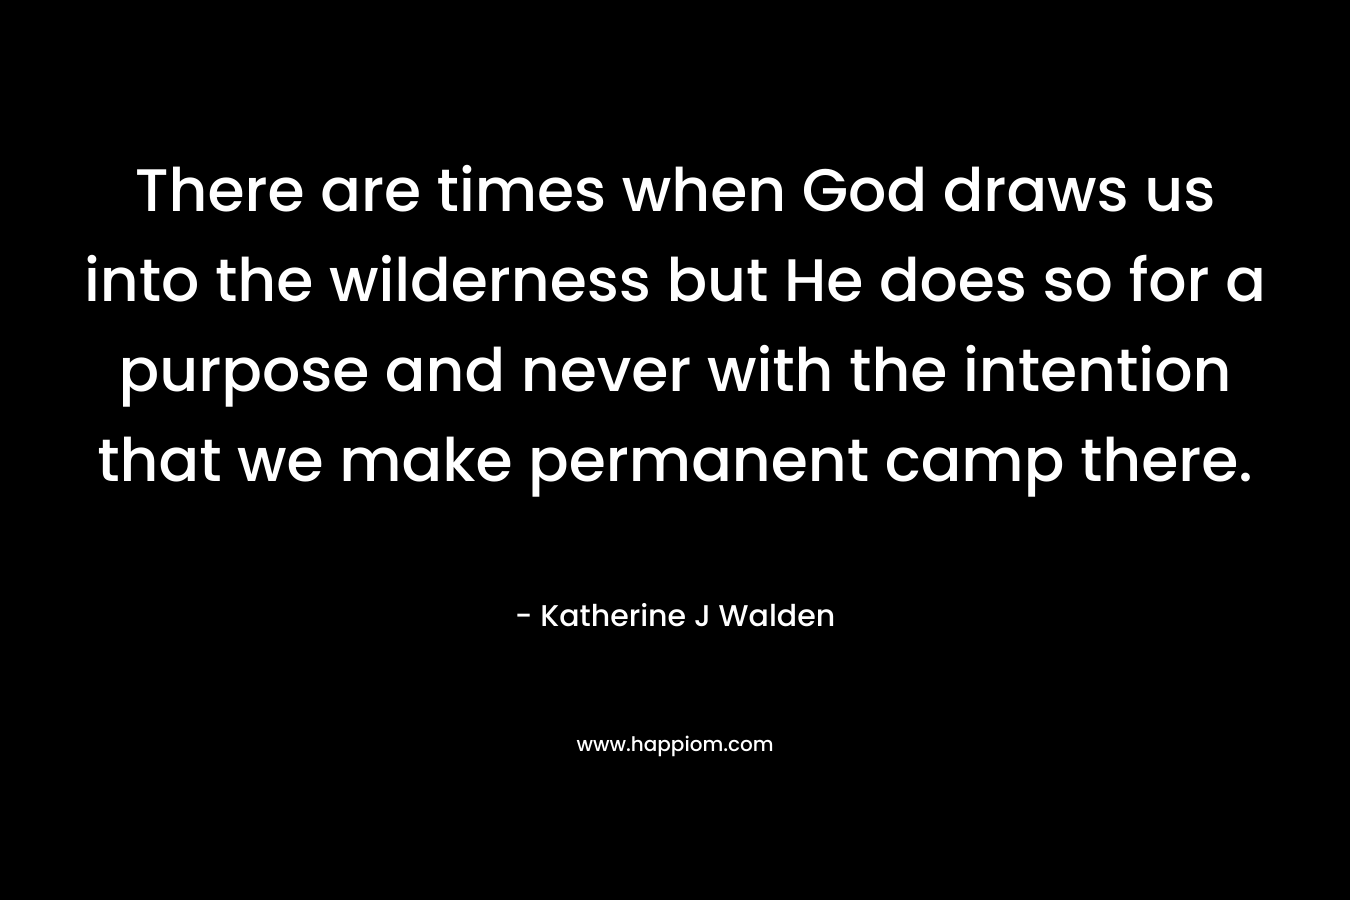 There are times when God draws us into the wilderness but He does so for a purpose and never with the intention that we make permanent camp there.